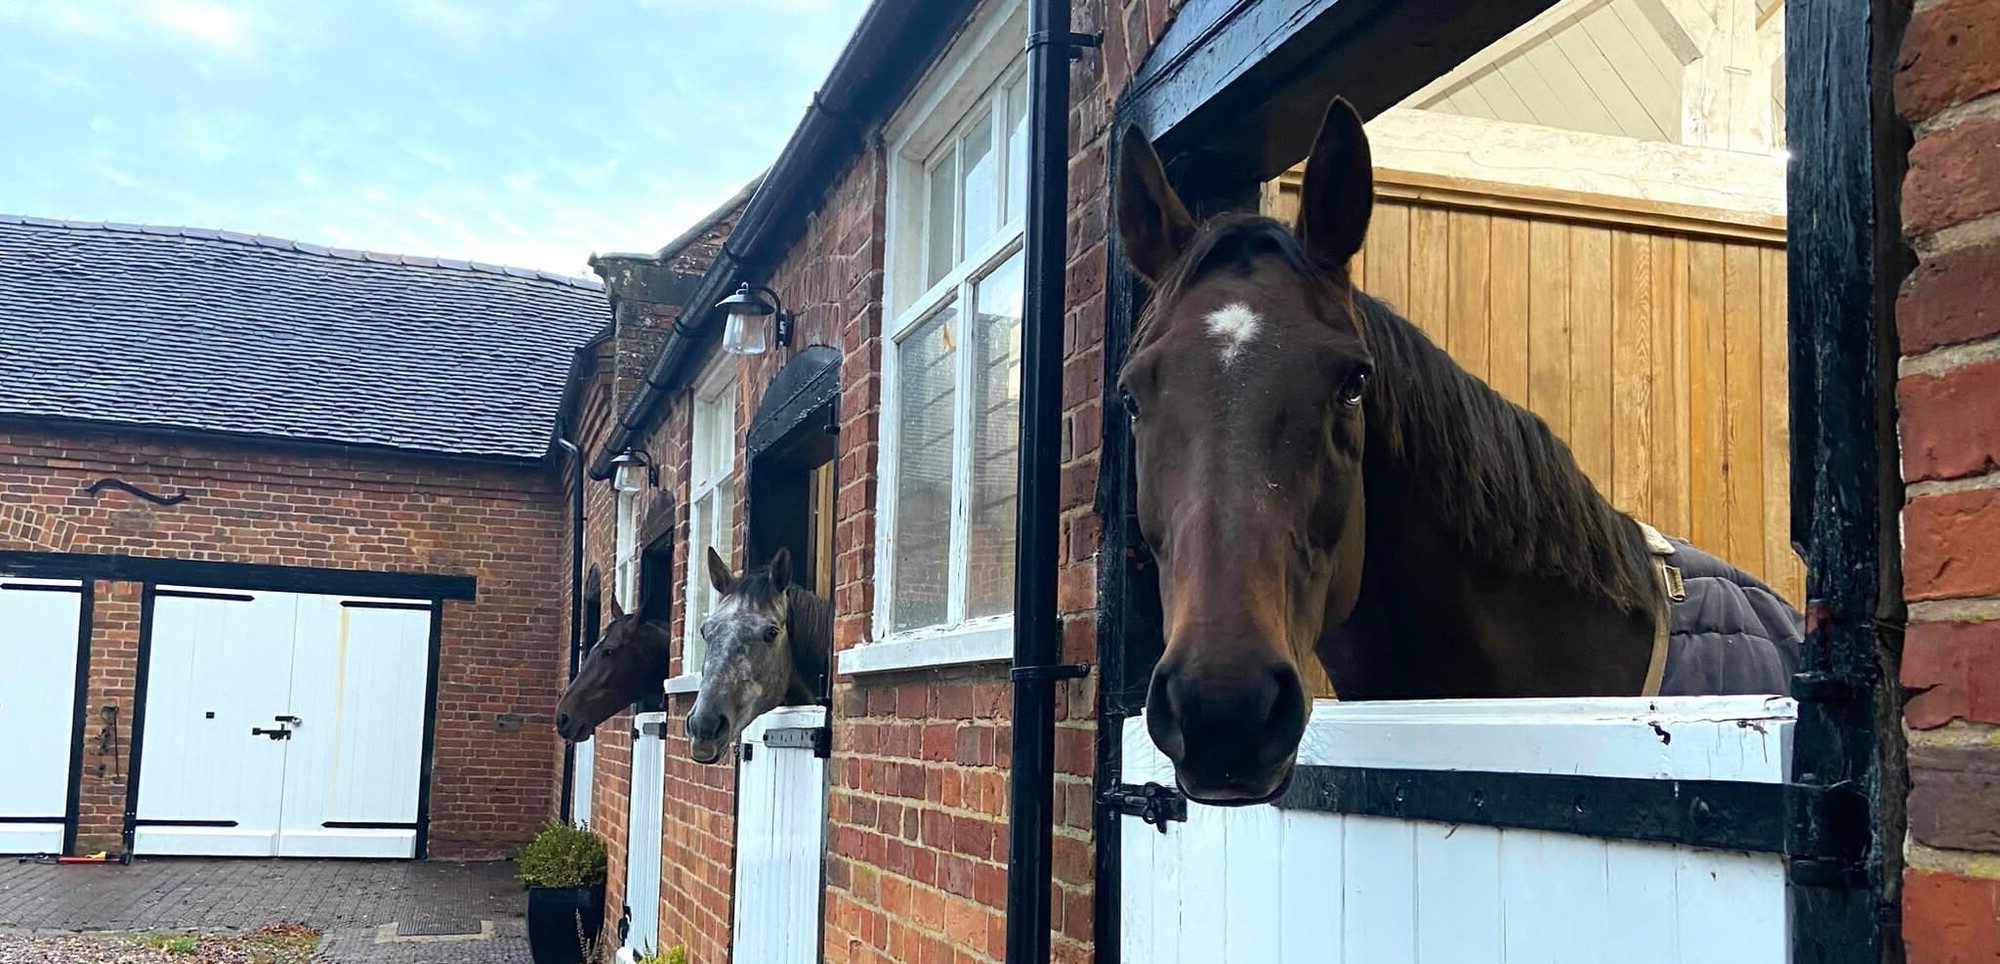 Three horses look out of their individual stable windows.